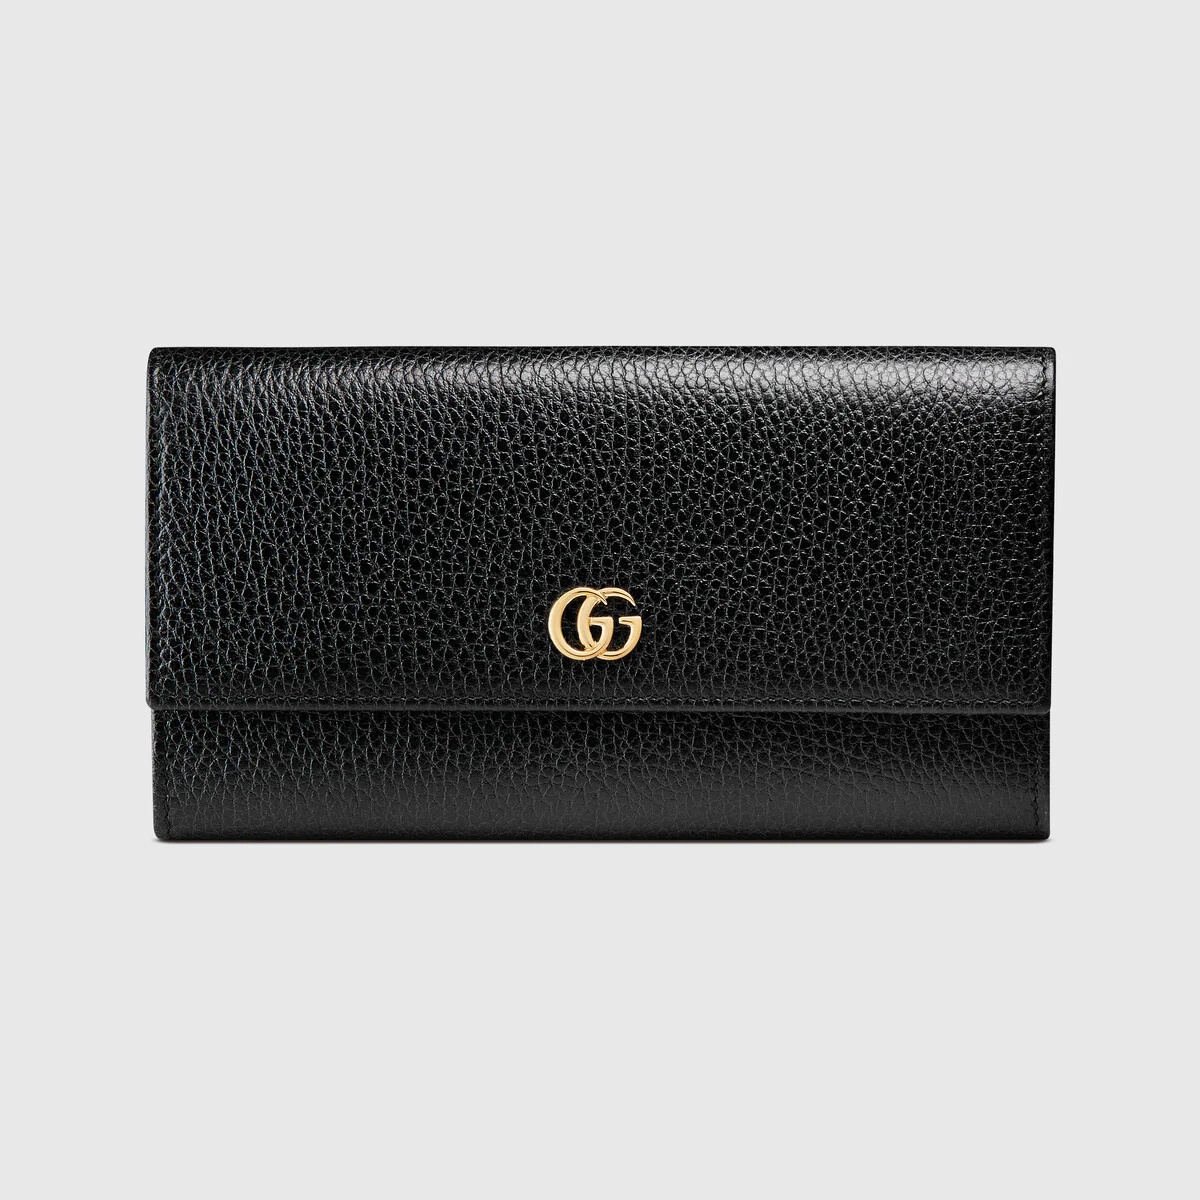 GG Marmont leather continental wallet - 1